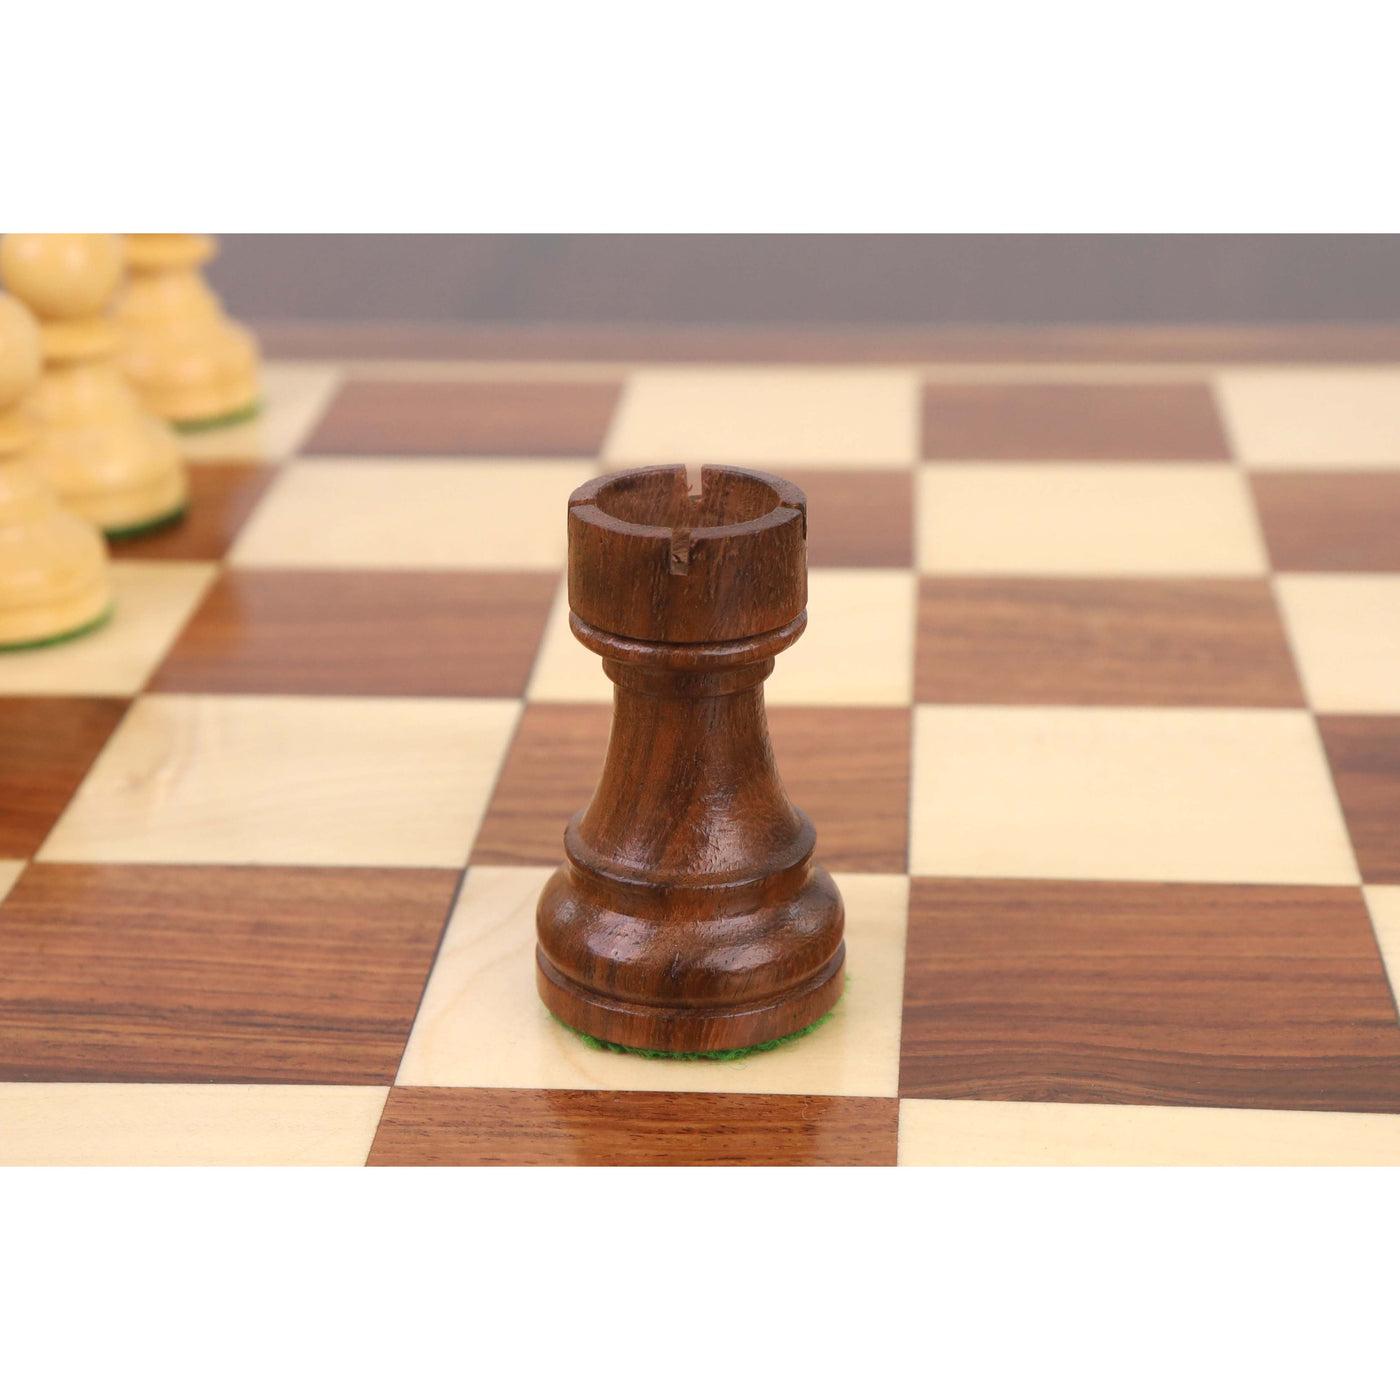 3.3" Tournament Staunton Chess Set - Chess Pieces Only - Golden Rosewood - Compact size